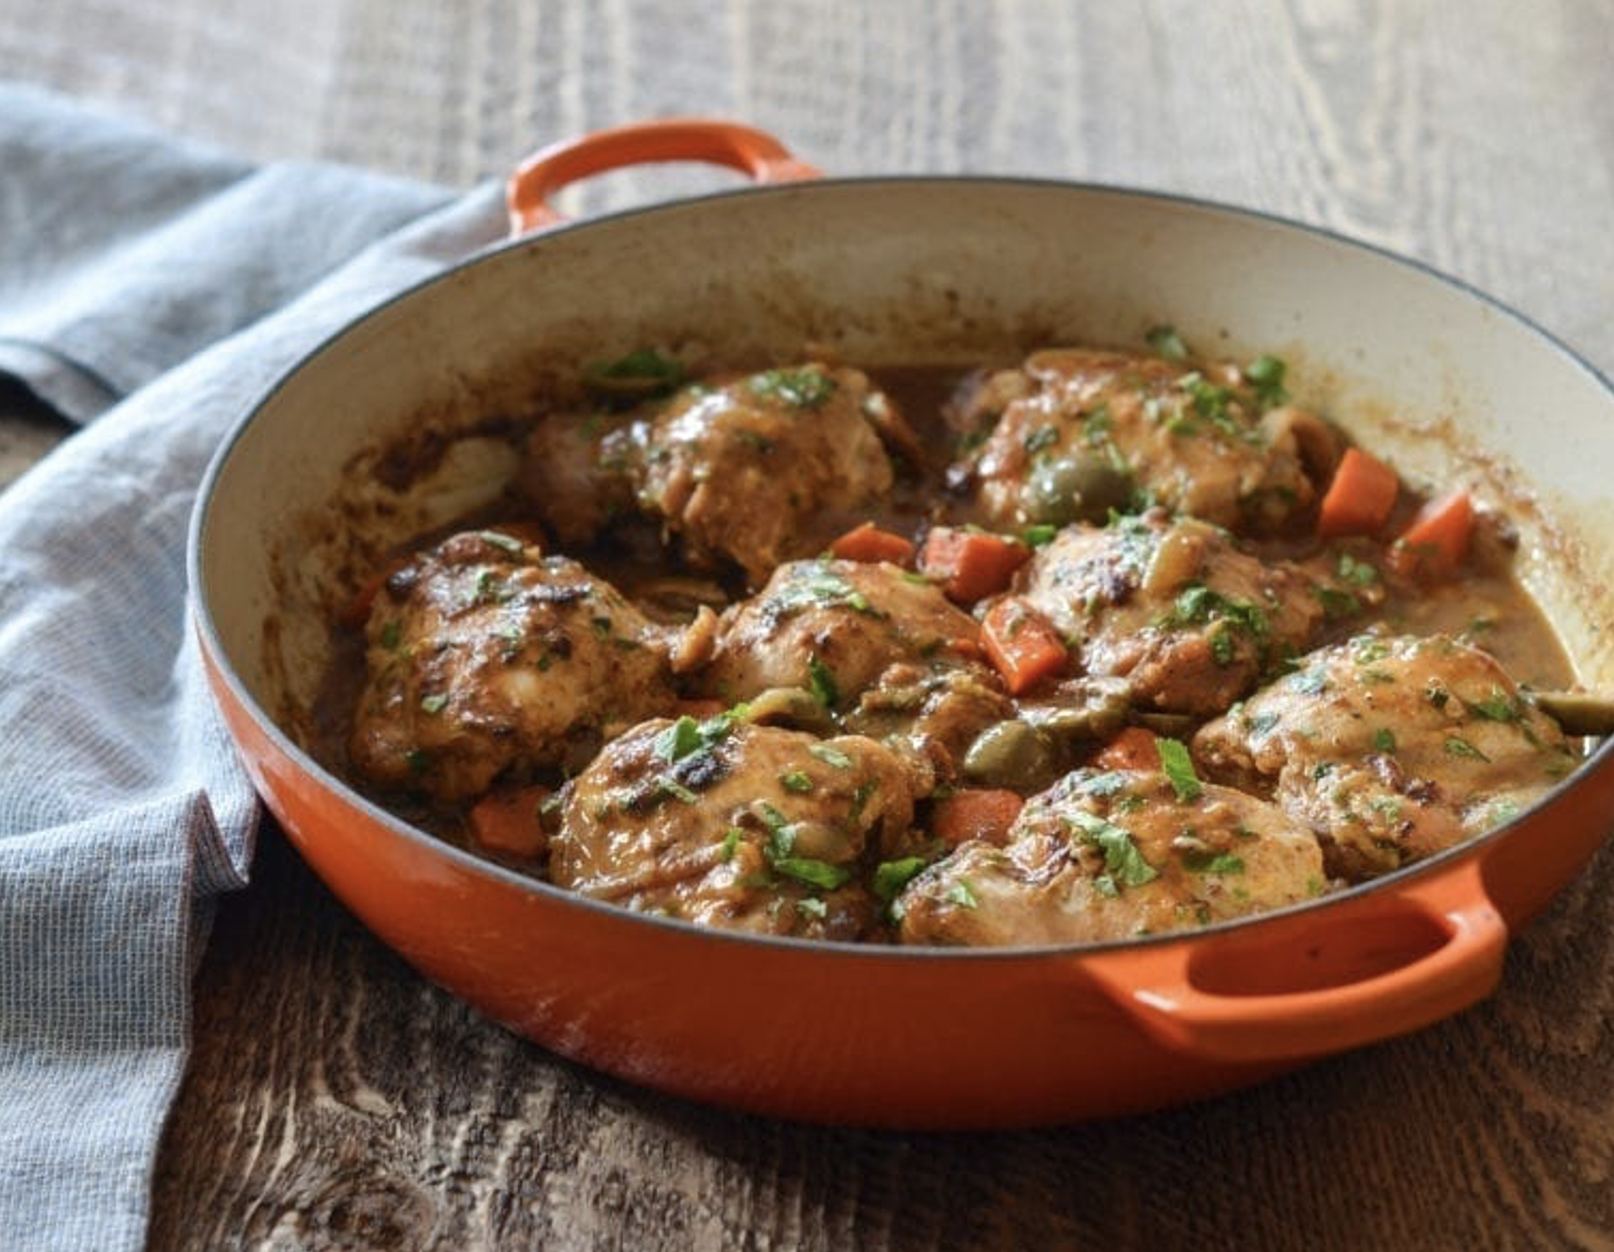 A Delicious Harissa Chicken Tagine Recipe You Simply Have to Try